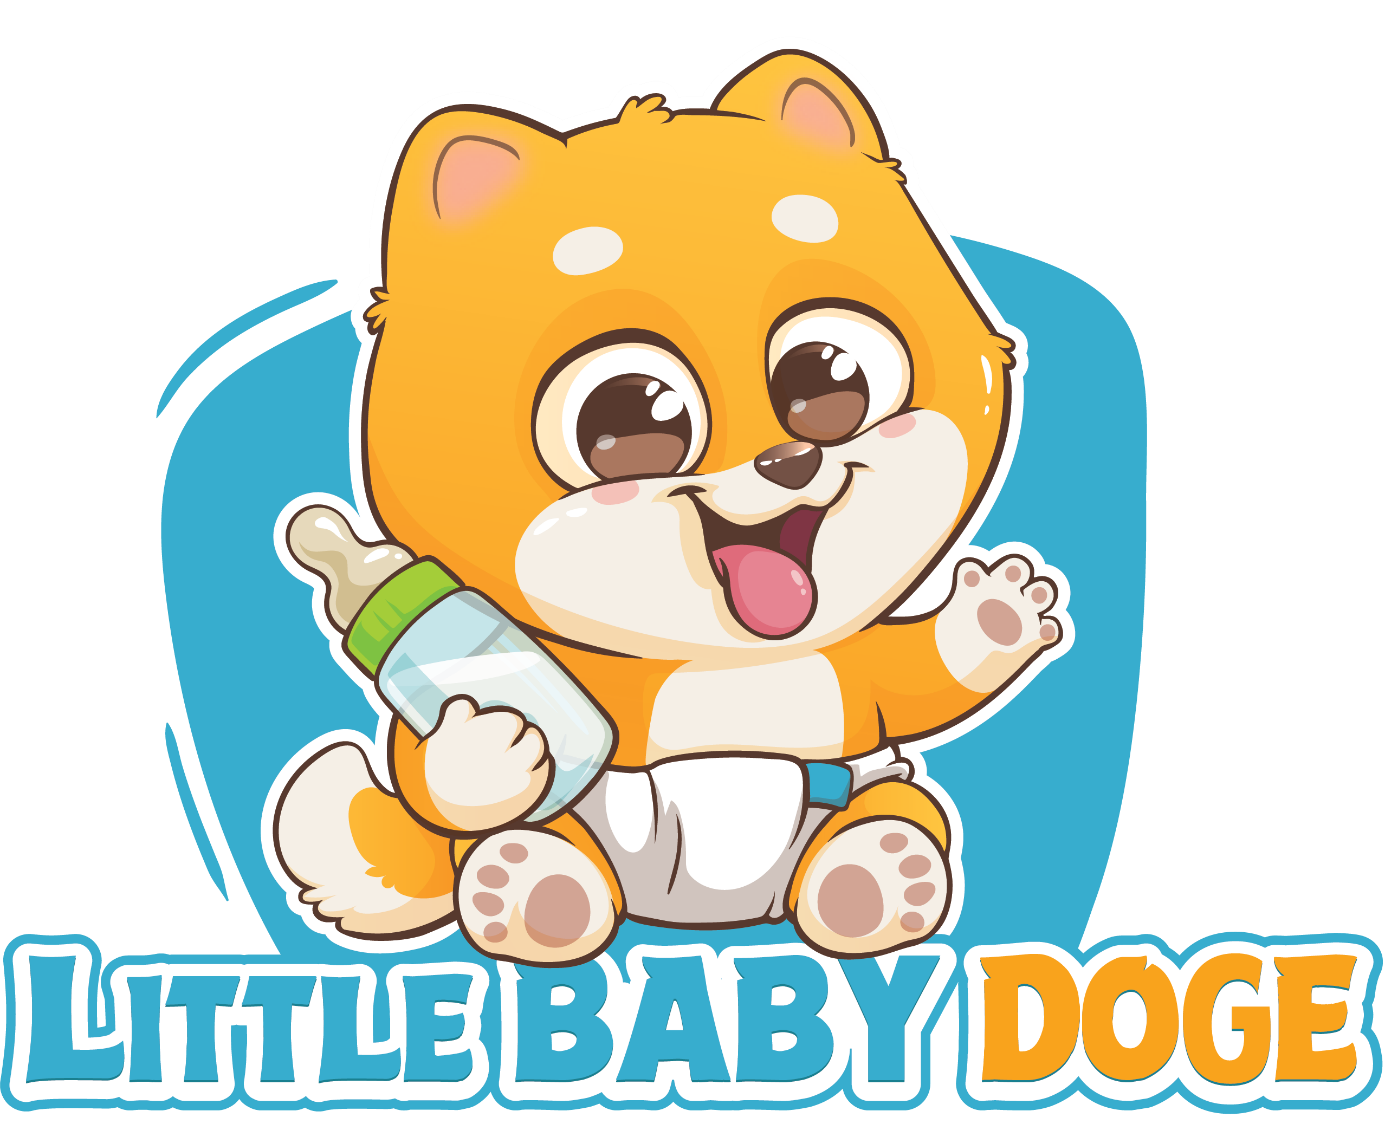 Little Baby Doge, Saturday, September 18, 2021, Press release picture